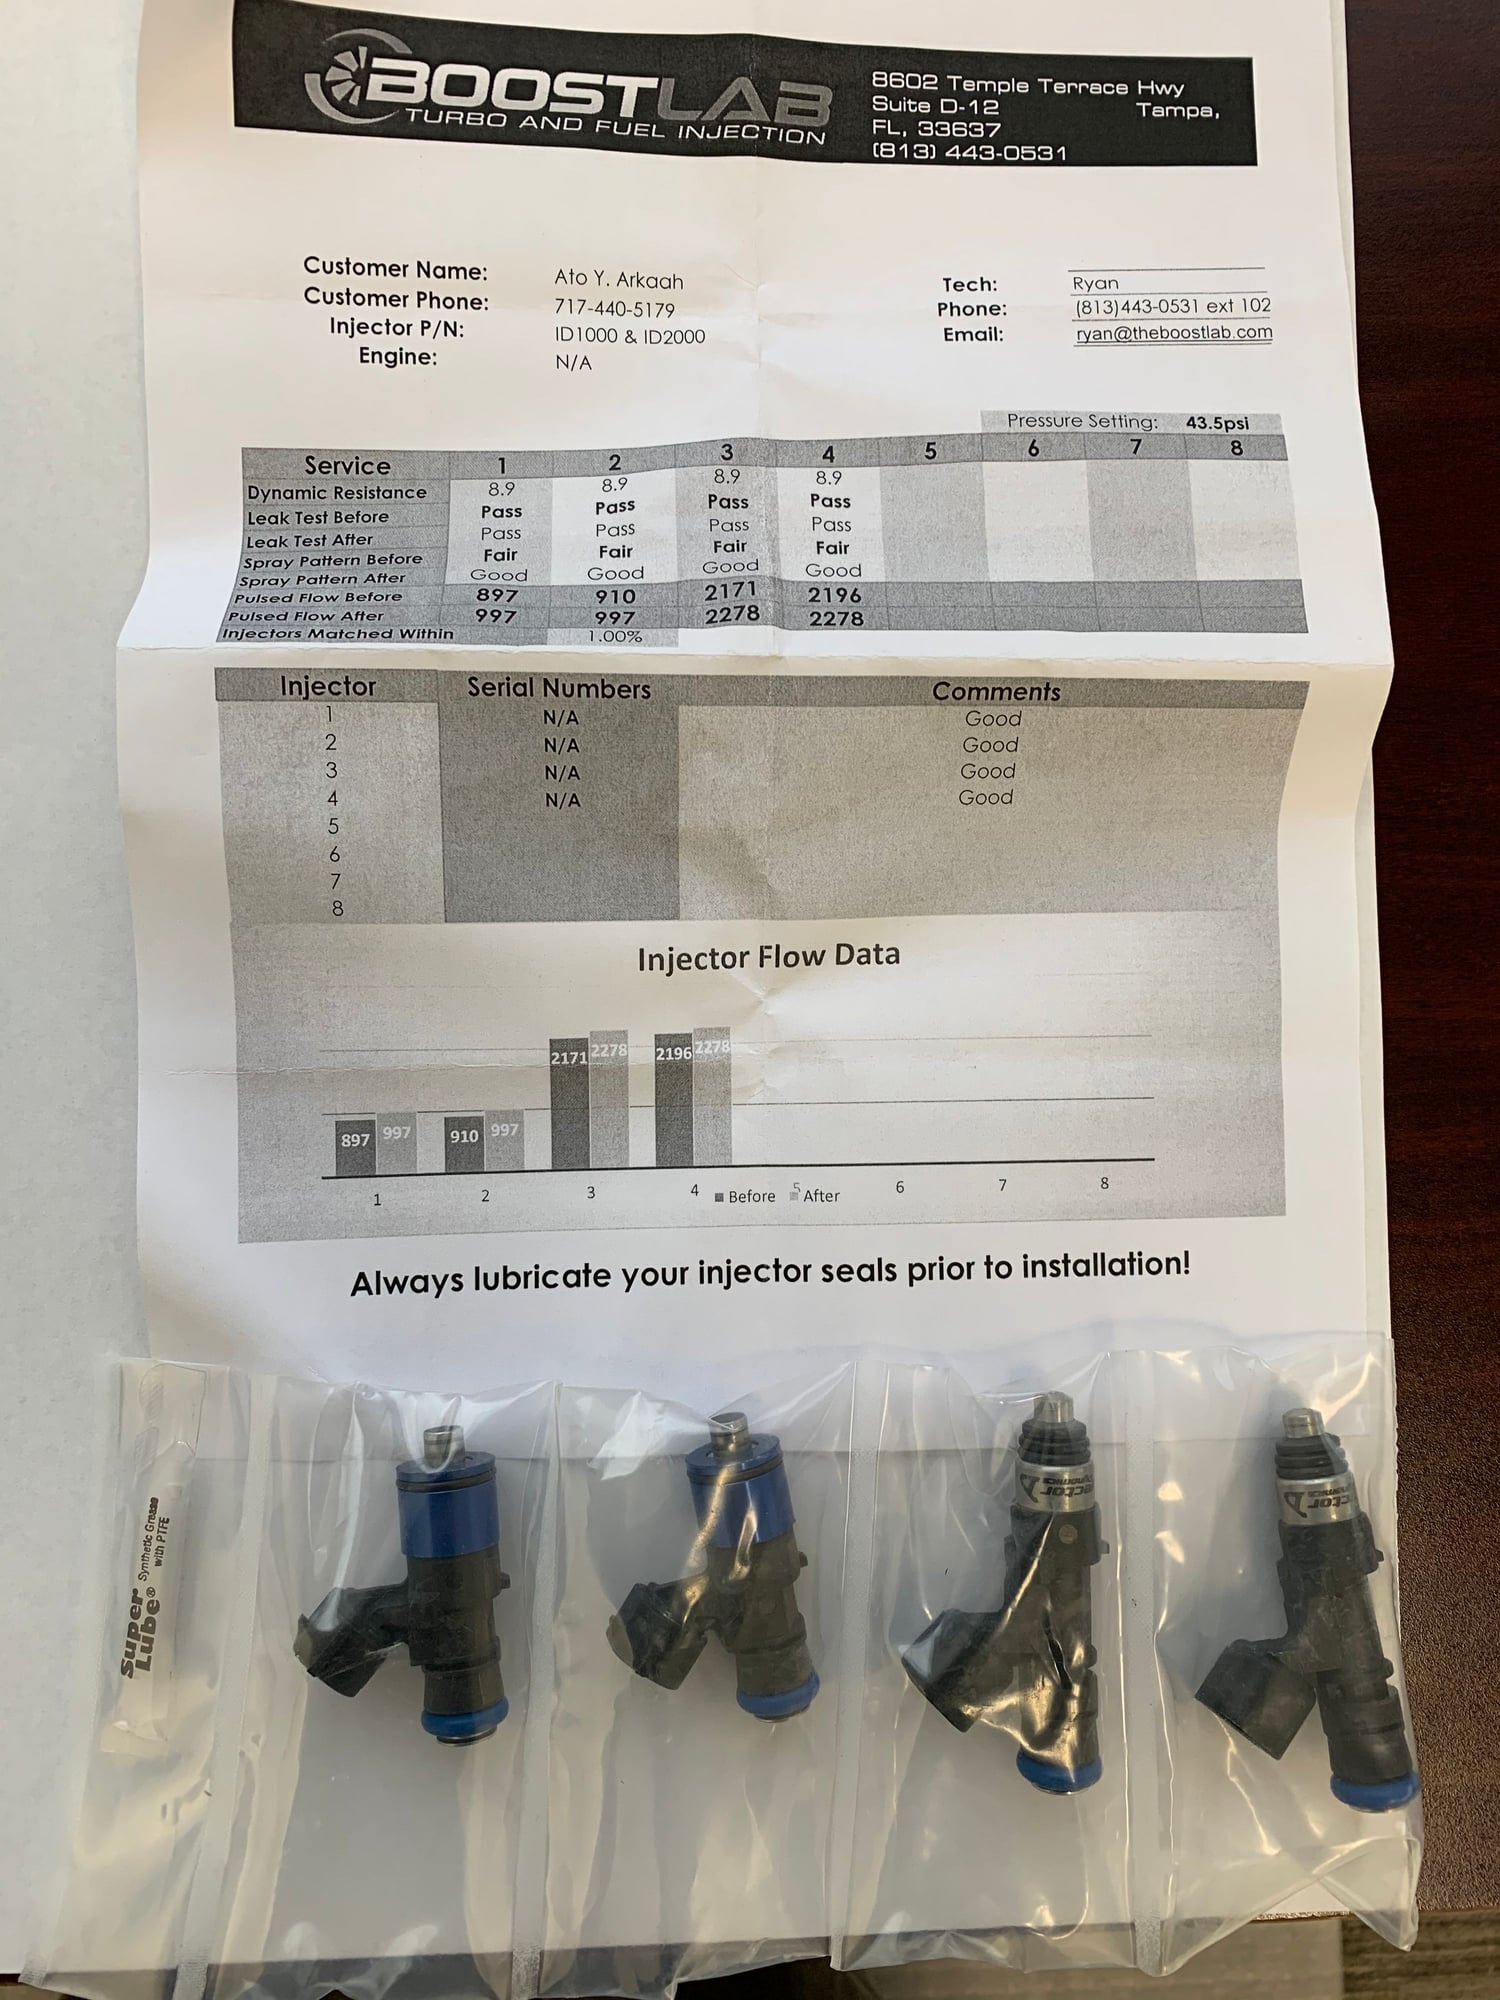 Engine - Intake/Fuel - FFE Fuel Rails + 1000/2000 ID Injectors (Boost Lab Serviced) - Used - 1993 to 2000 Mazda RX-7 - Allentown, PA 18031, United States